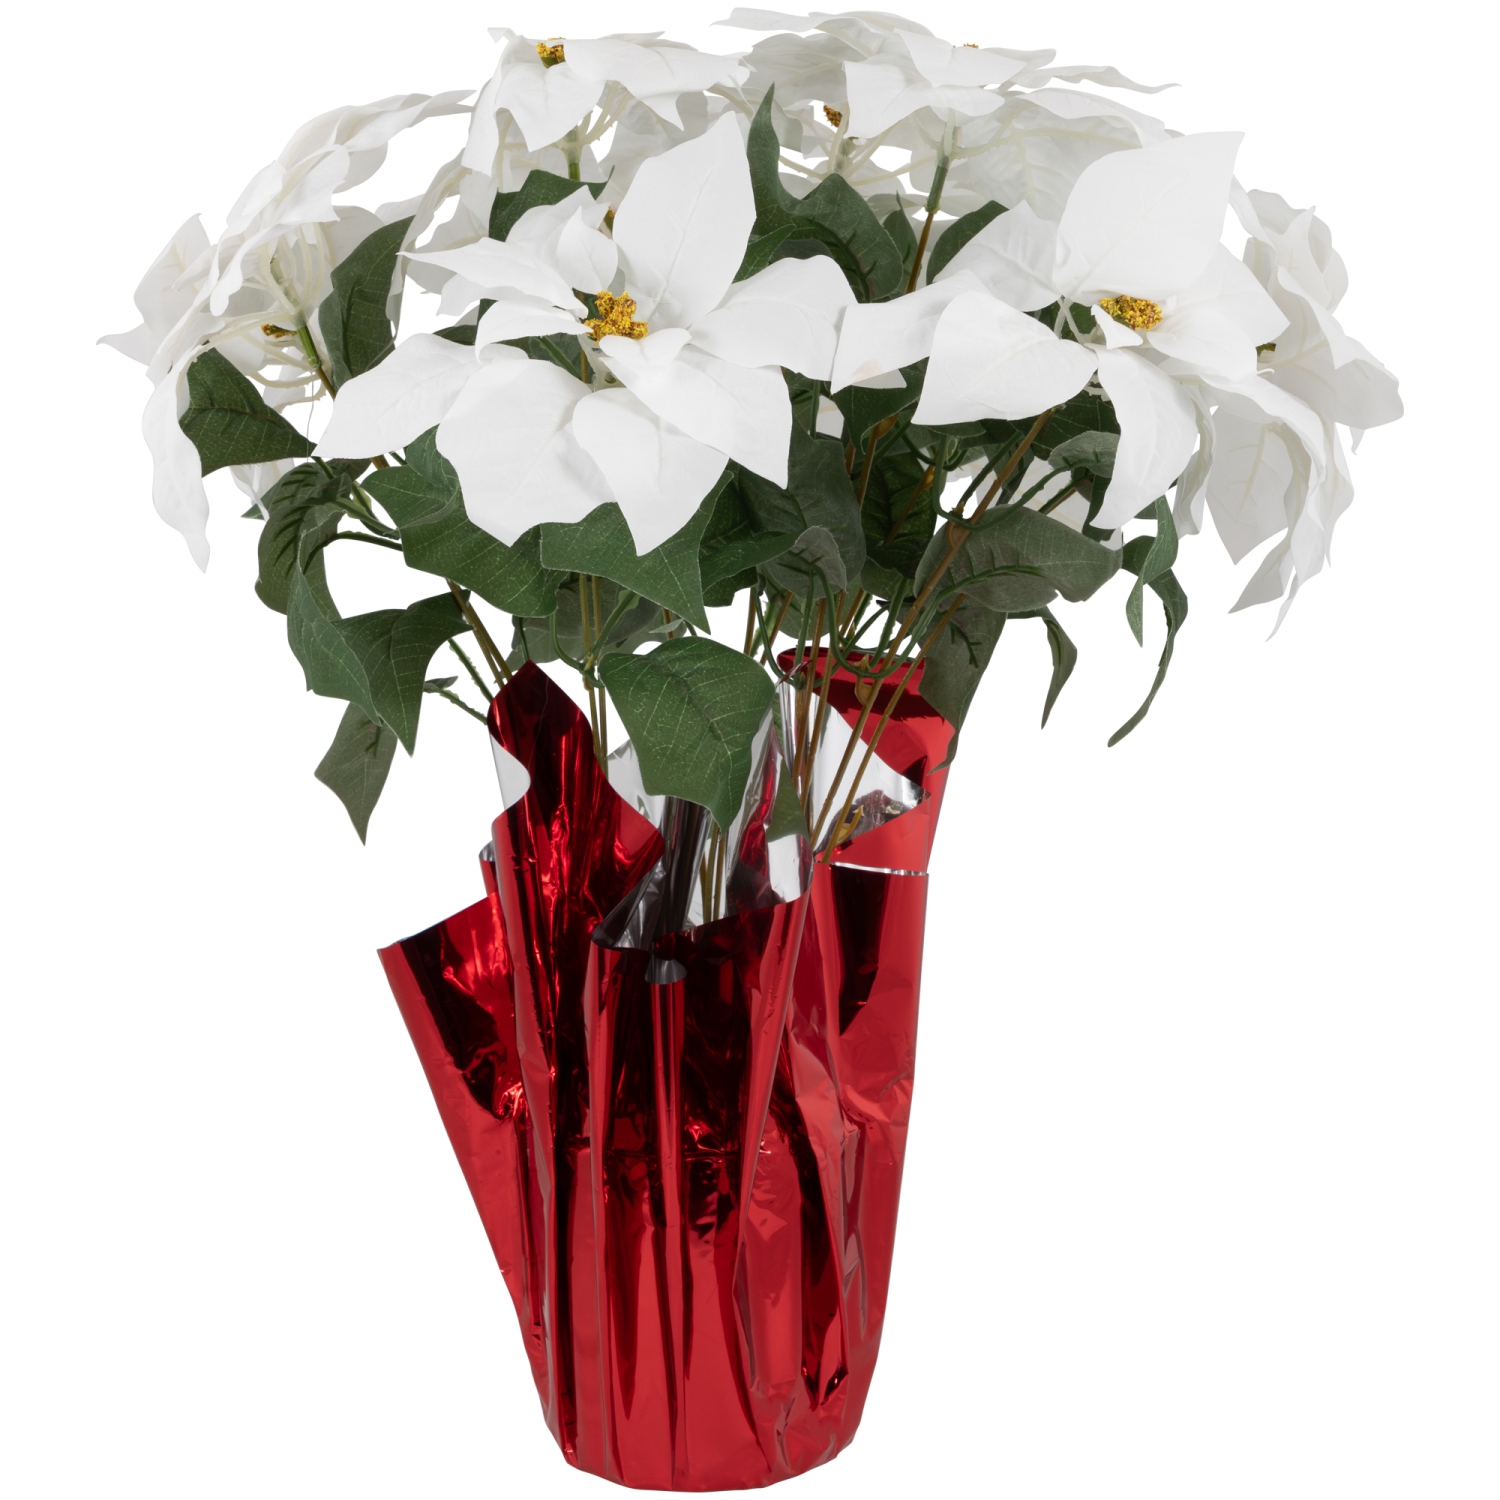 22" White Artificial Christmas Poinsettia Flowers with Red Wrapped Base